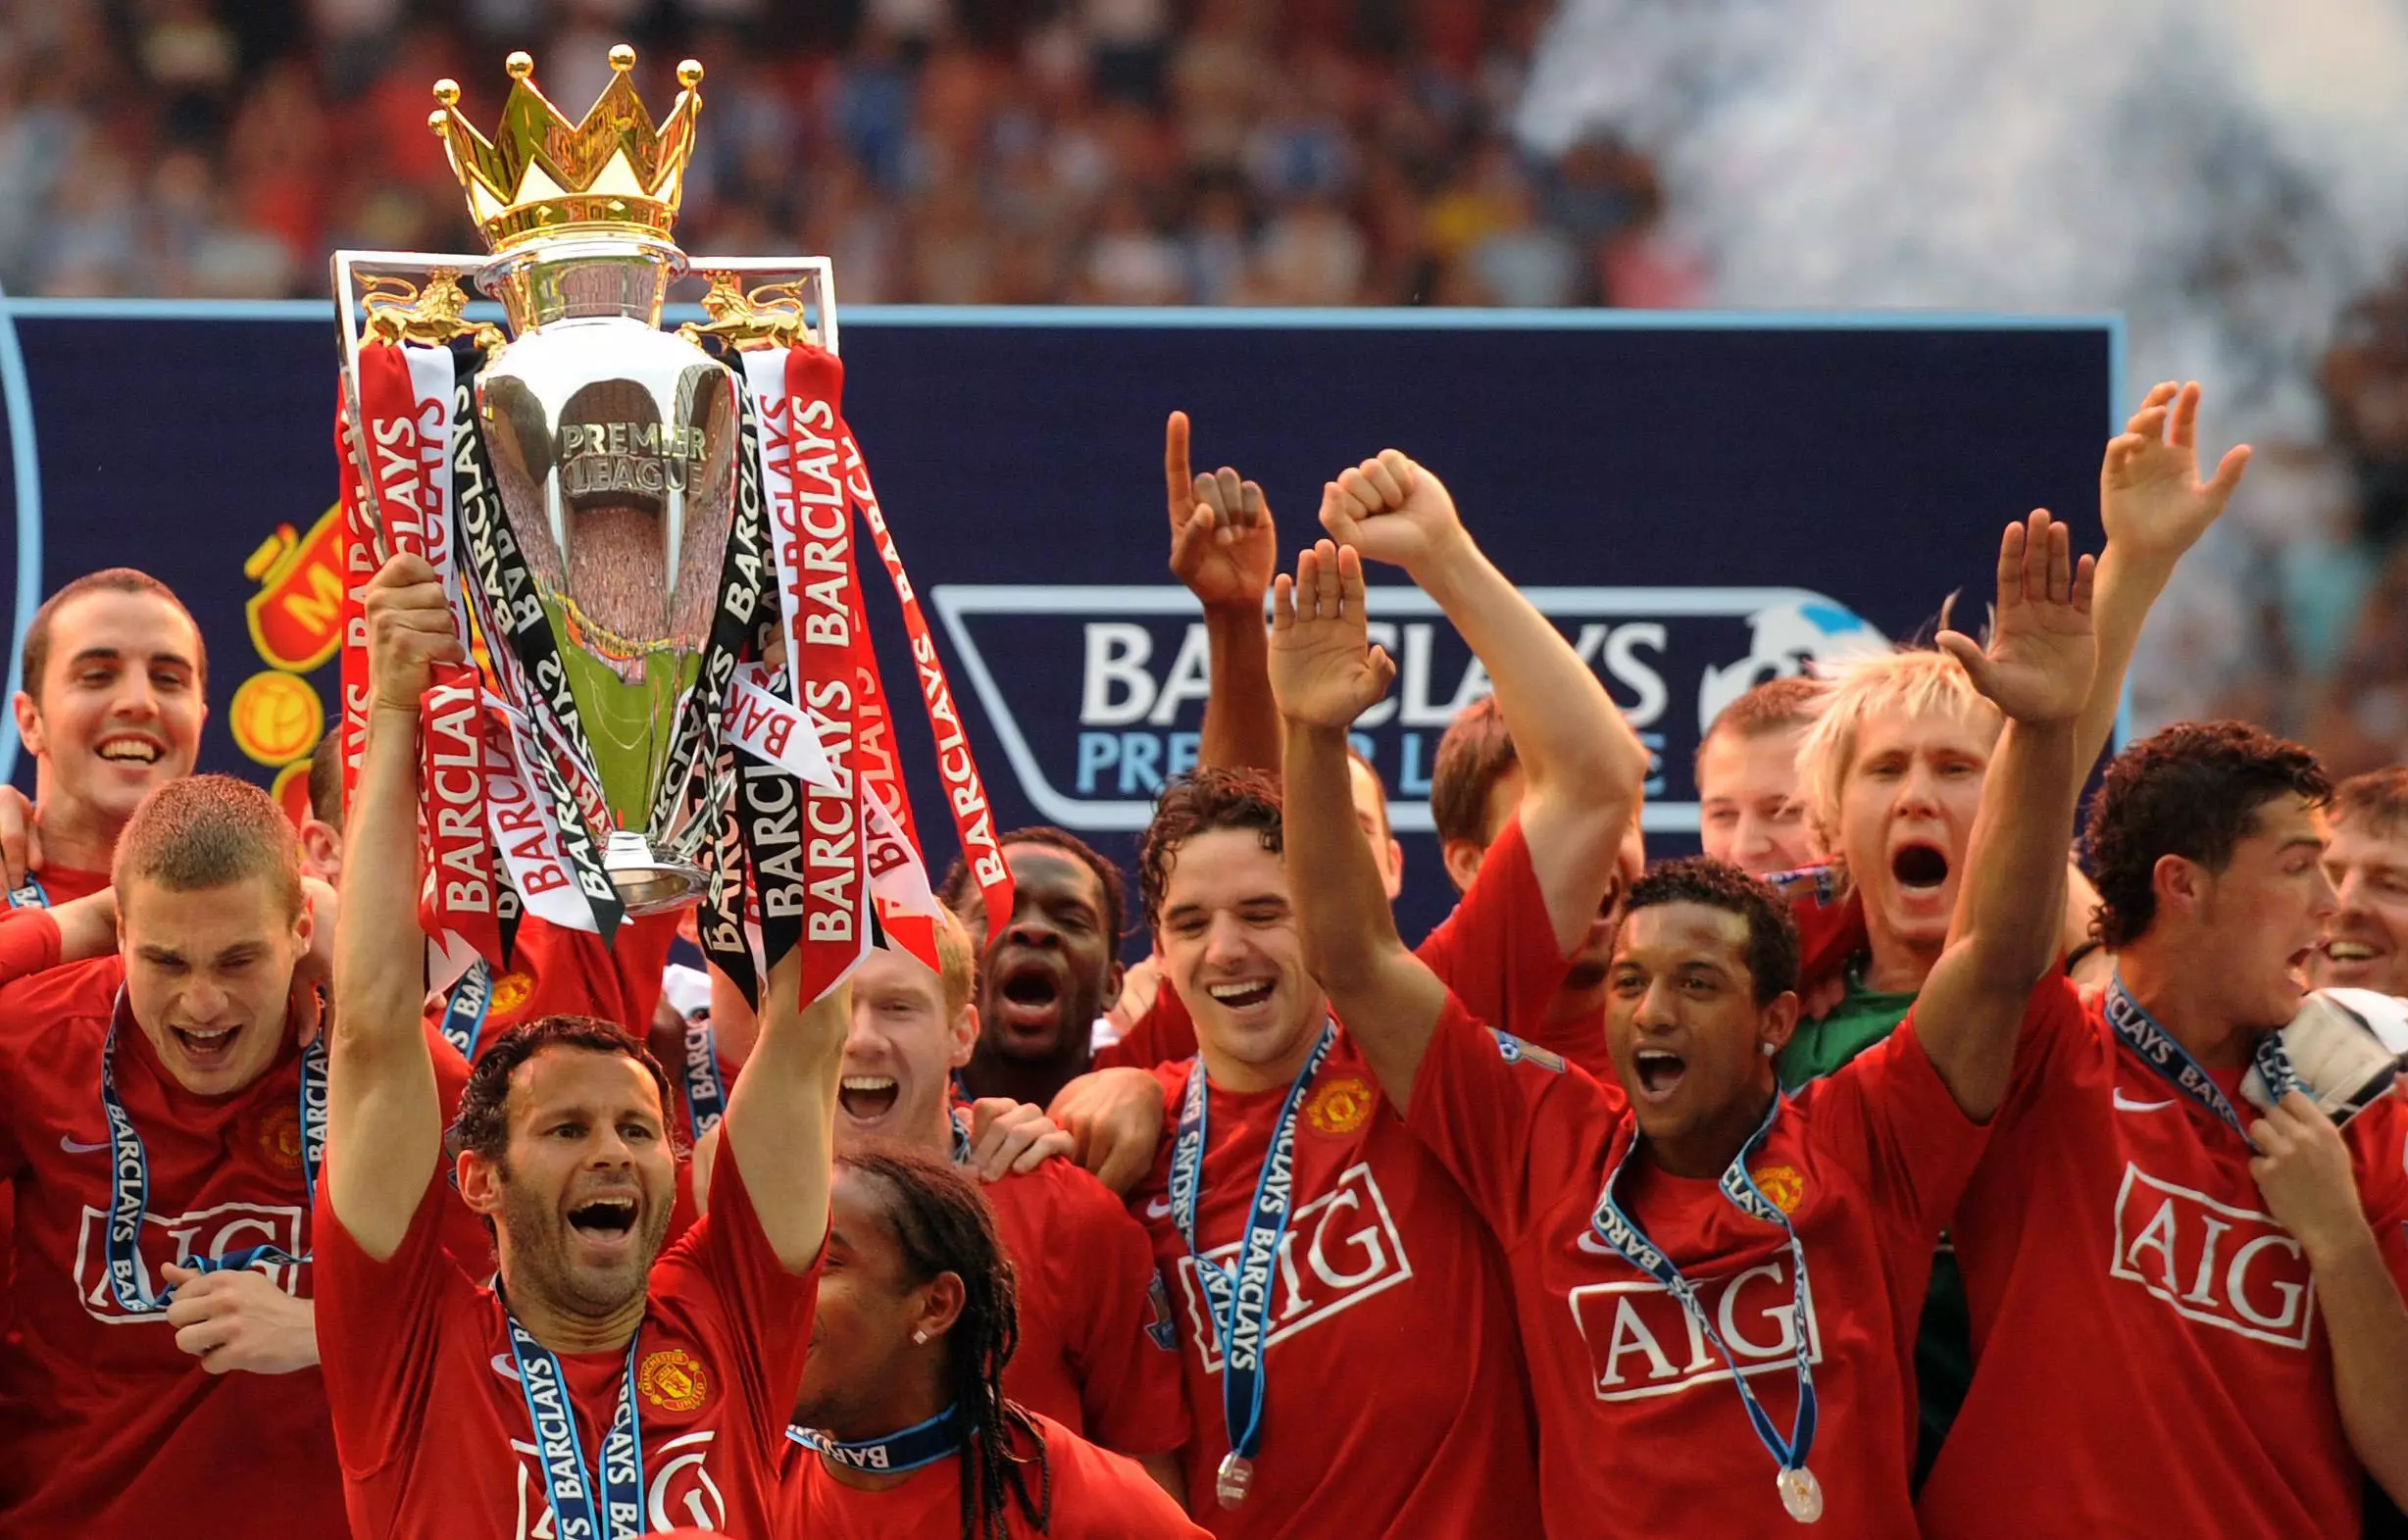 Giggs won the league 13 times. Image: PA Images